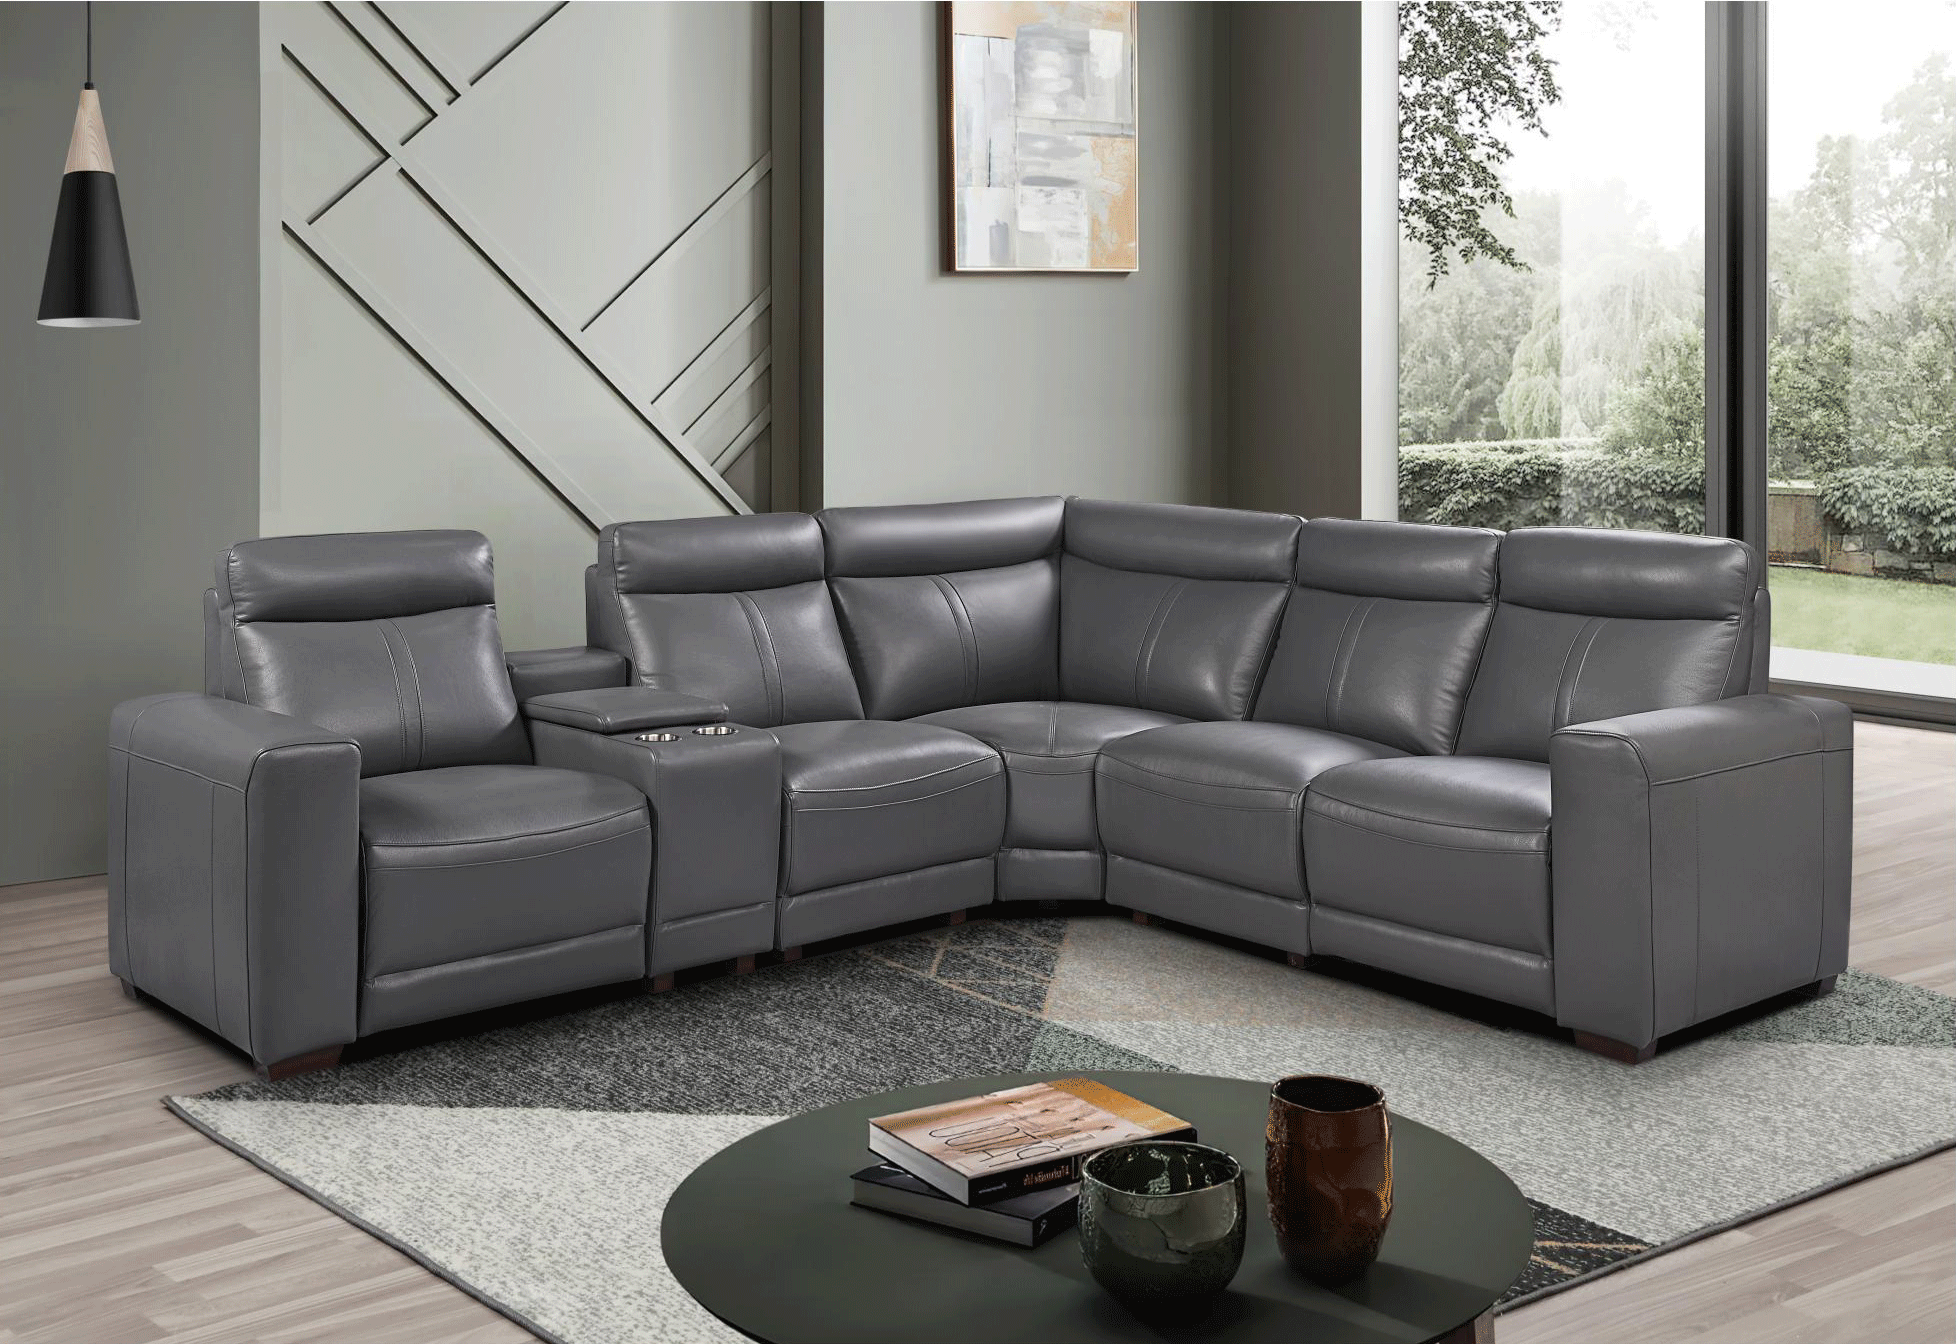 Bedroom Furniture Modern Bedrooms QS and KS 2777 Sectional w/ recliners